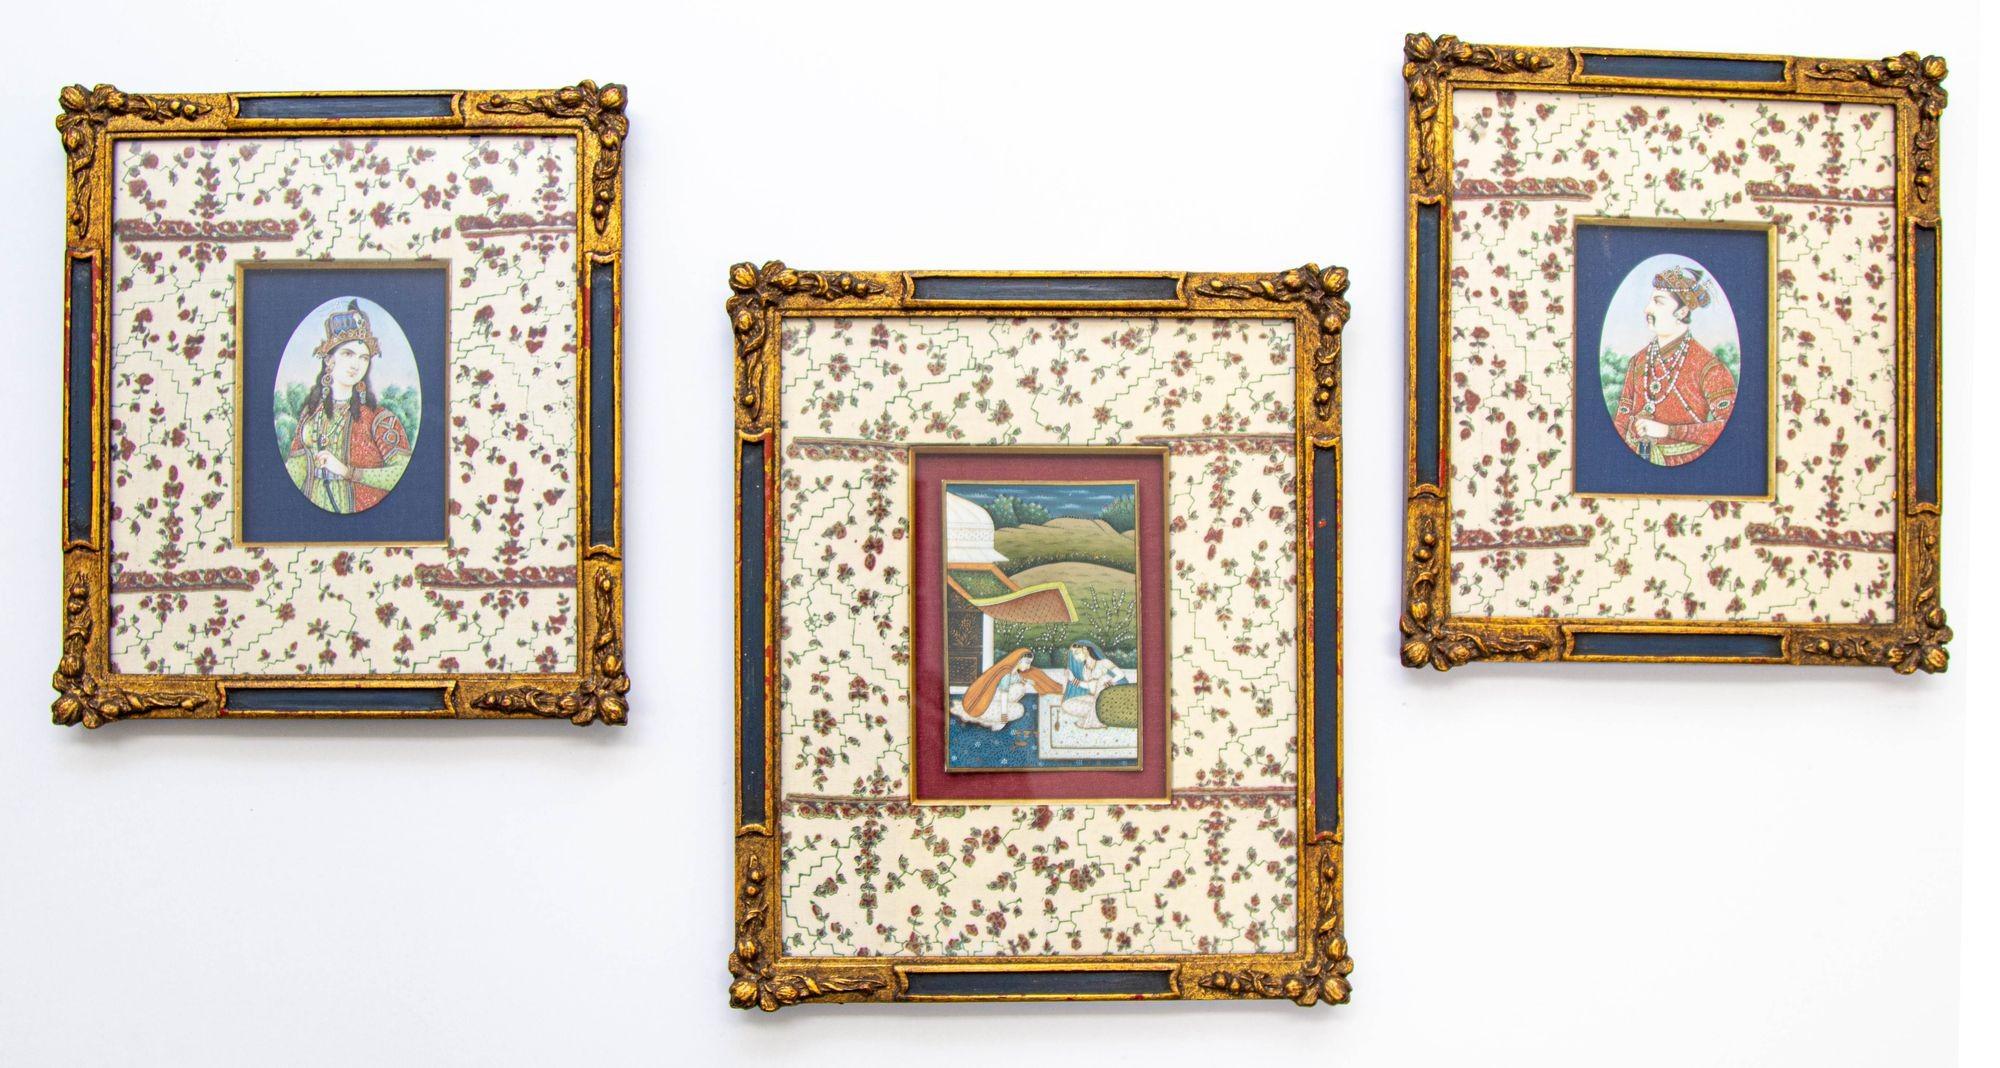 1940s  Antique Mughal Miniature Paintings of Emperor Jahangir and Noor Jahan set of 3 .
Antique set of 3 Mughal miniature paintings, beautifully framed.
Beautifully framed antique Mughal Miniature Painting, professionally framed by a Art Gallery in